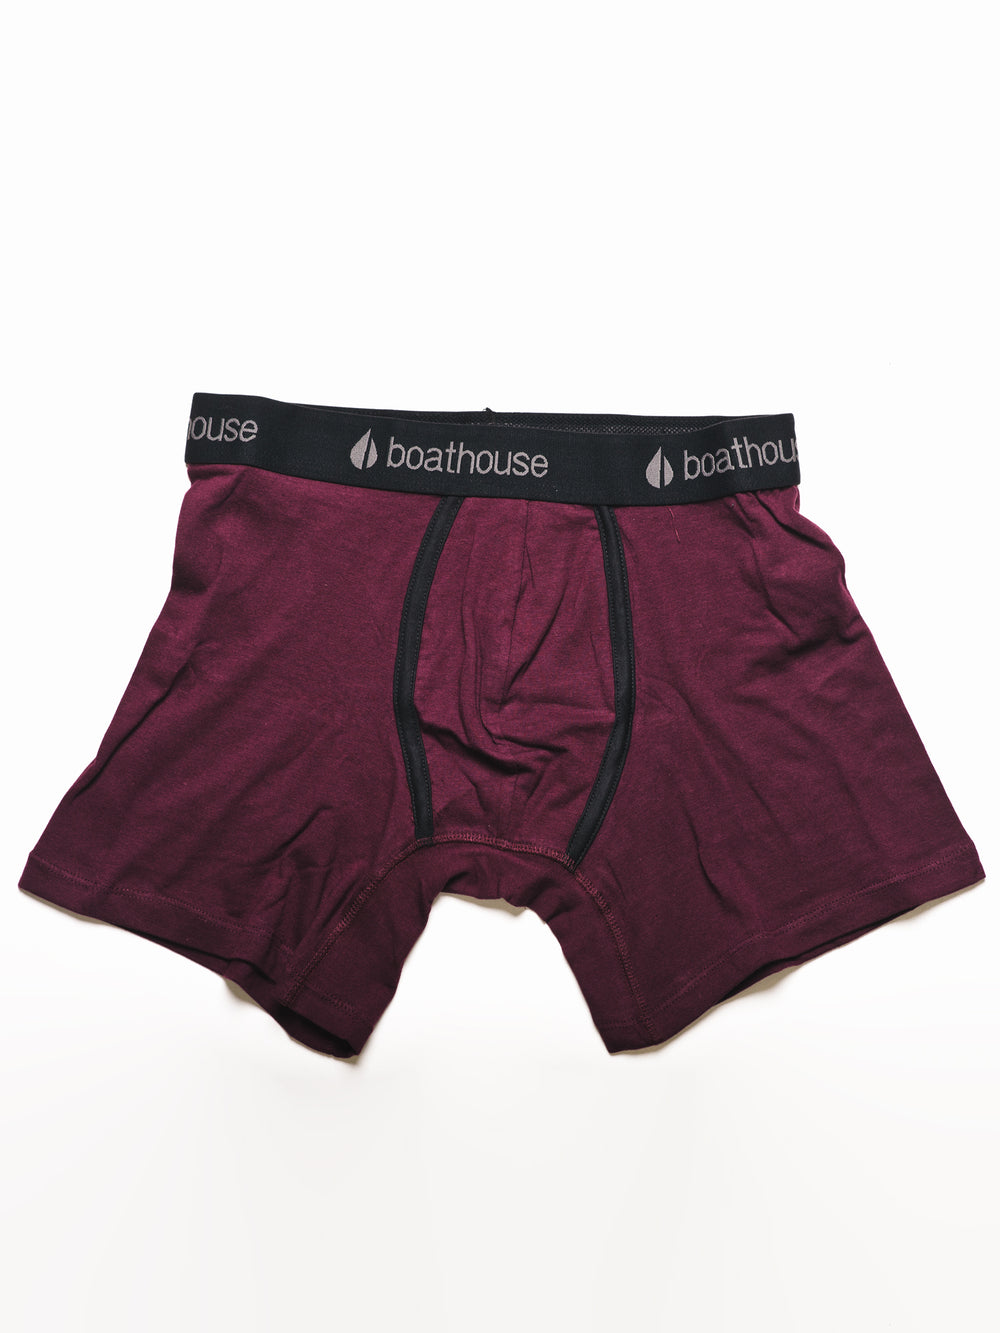 SOLID KNIT BRIEF - PORT - CLEARANCE